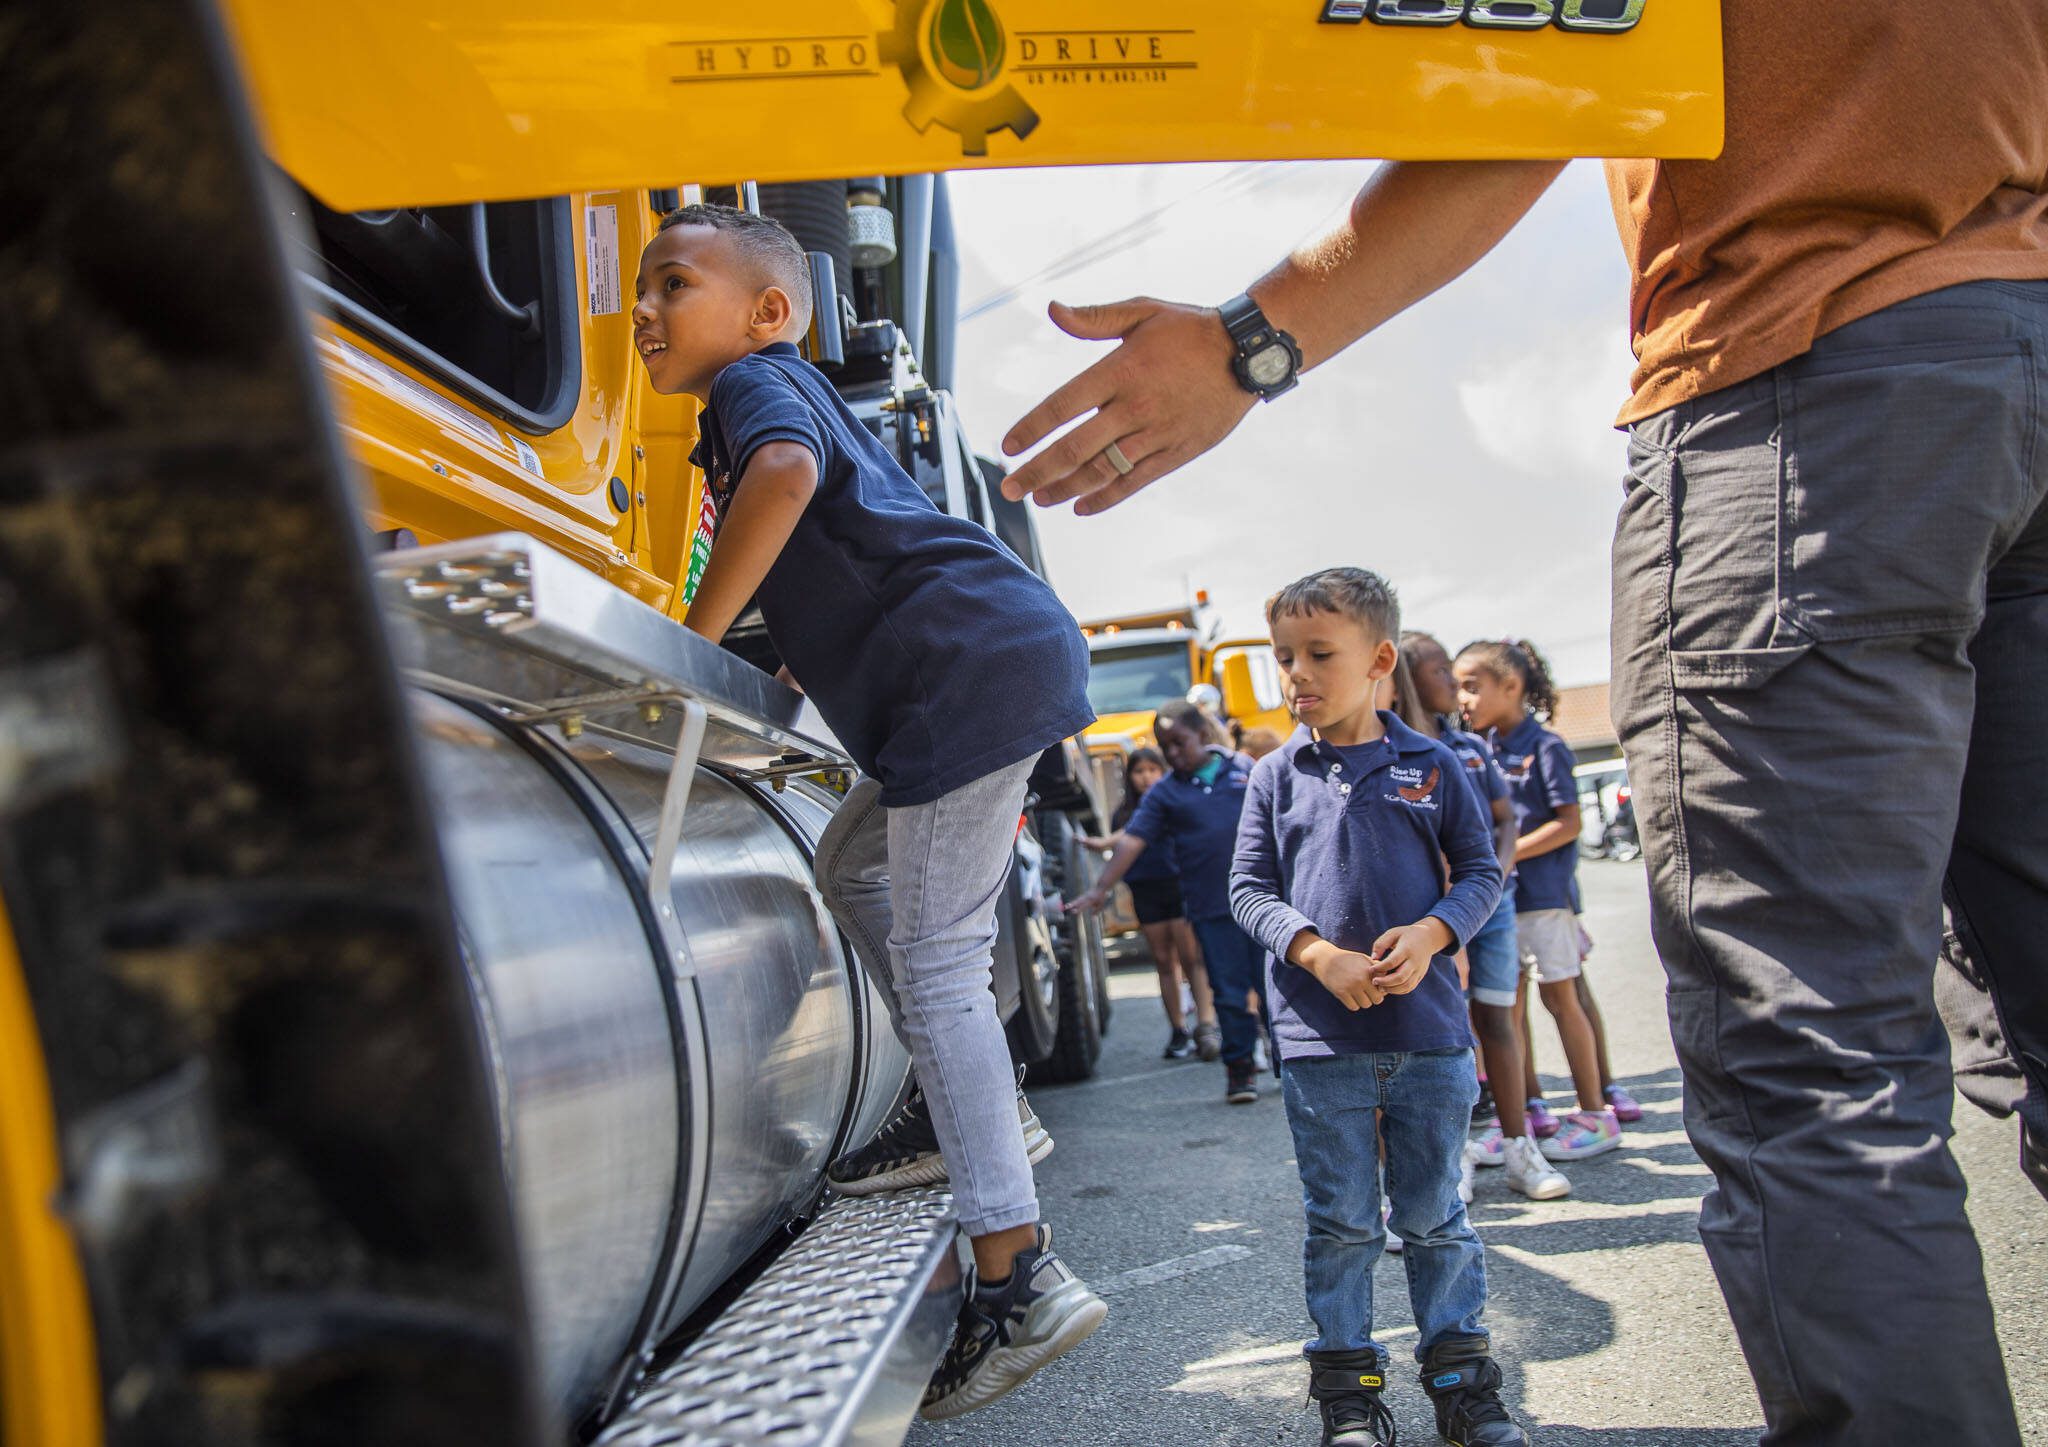 Michael Fekede, 5, climbs up into a truck during an event announcing funding for affordable child care slots held at Rise Up Academy on Thursday, July 6, 2023 in Everett, Washington. Rise Up Academy is one of a handful of child care facilities awarded funds to help increase child care slots. (Olivia Vanni / The Herald)